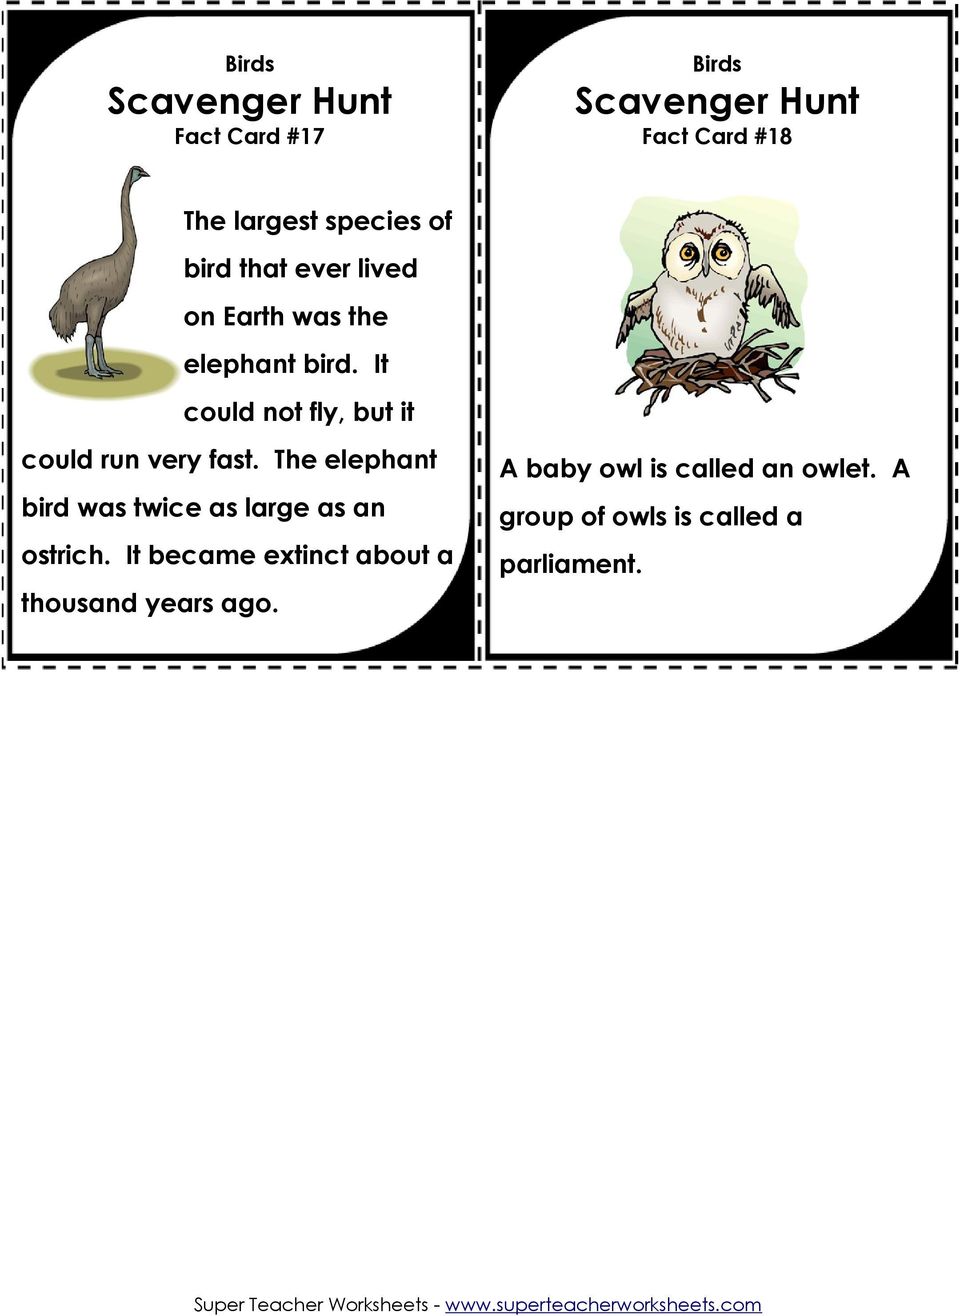 The elephant bird was twice as large as an ostrich.